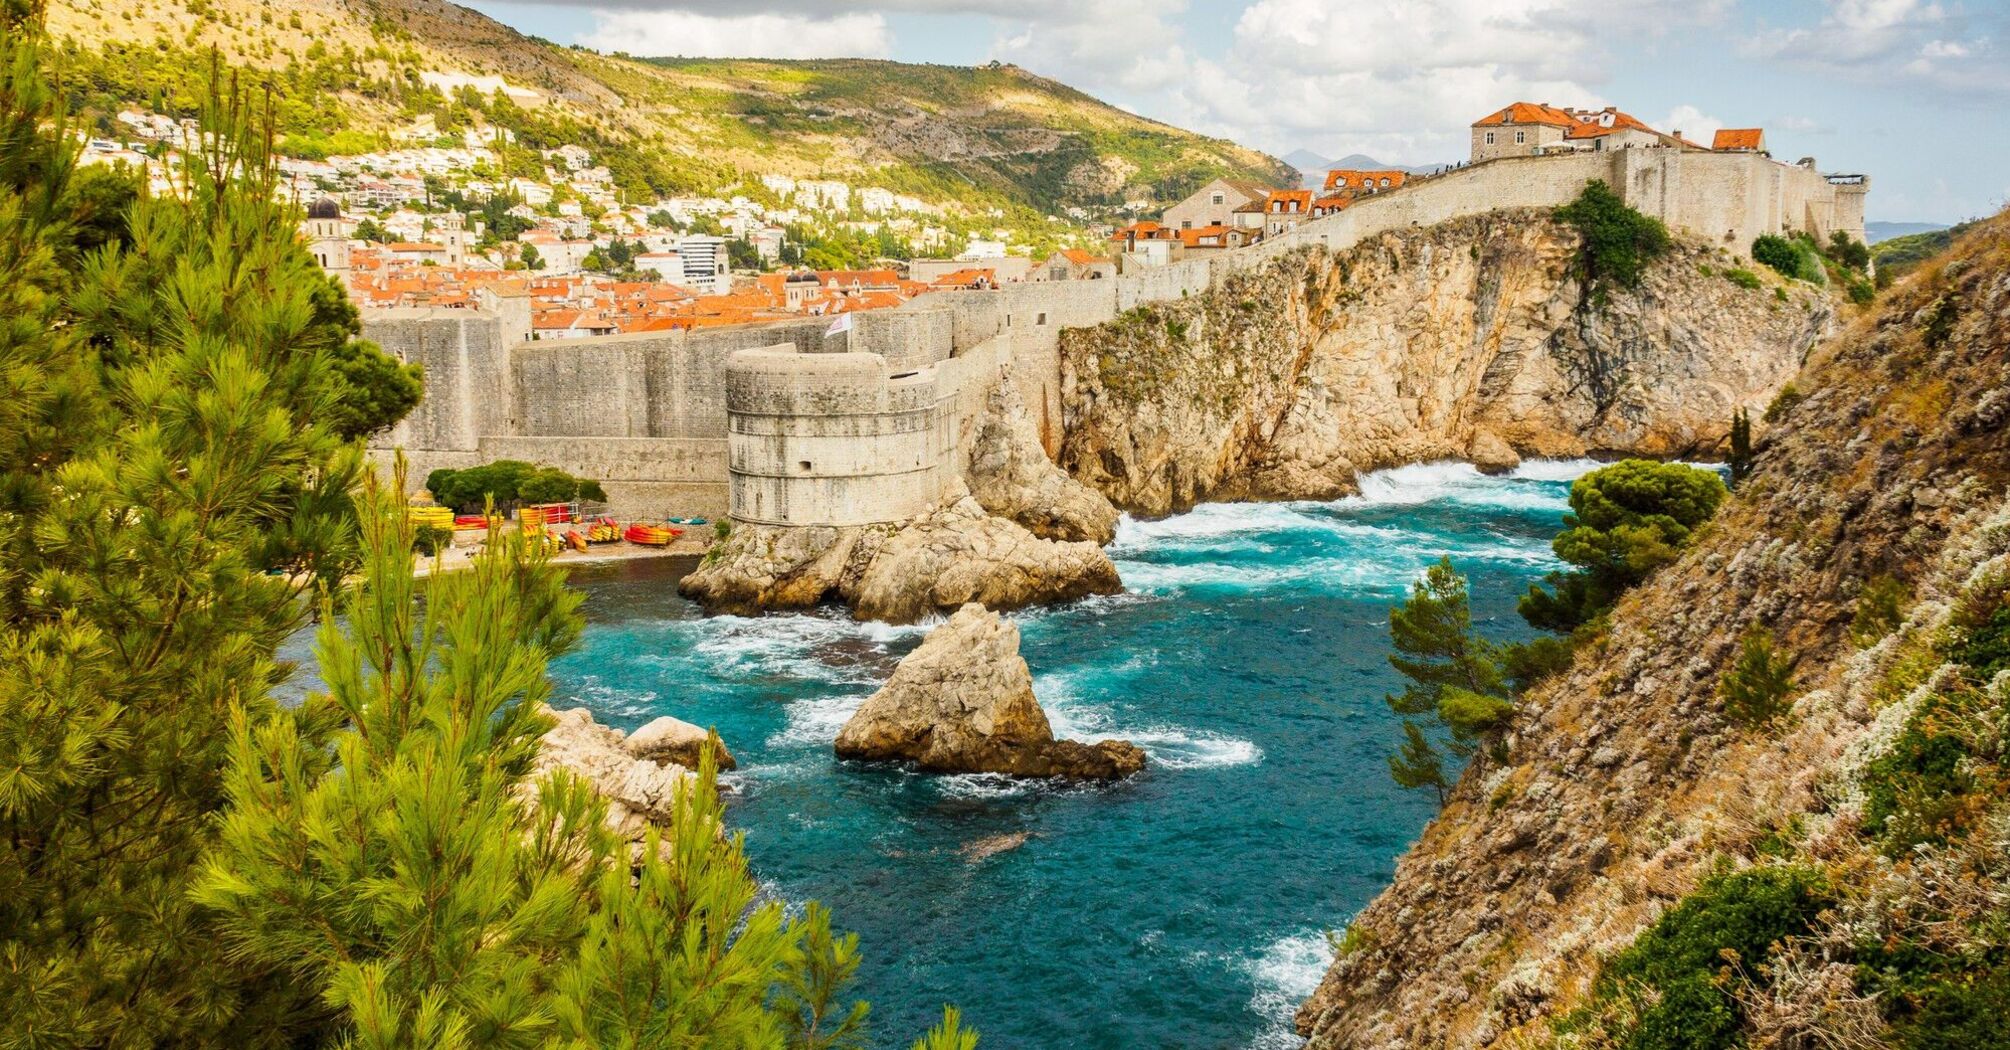 The most romantic places in Croatia: what to visit during a trip with your partner